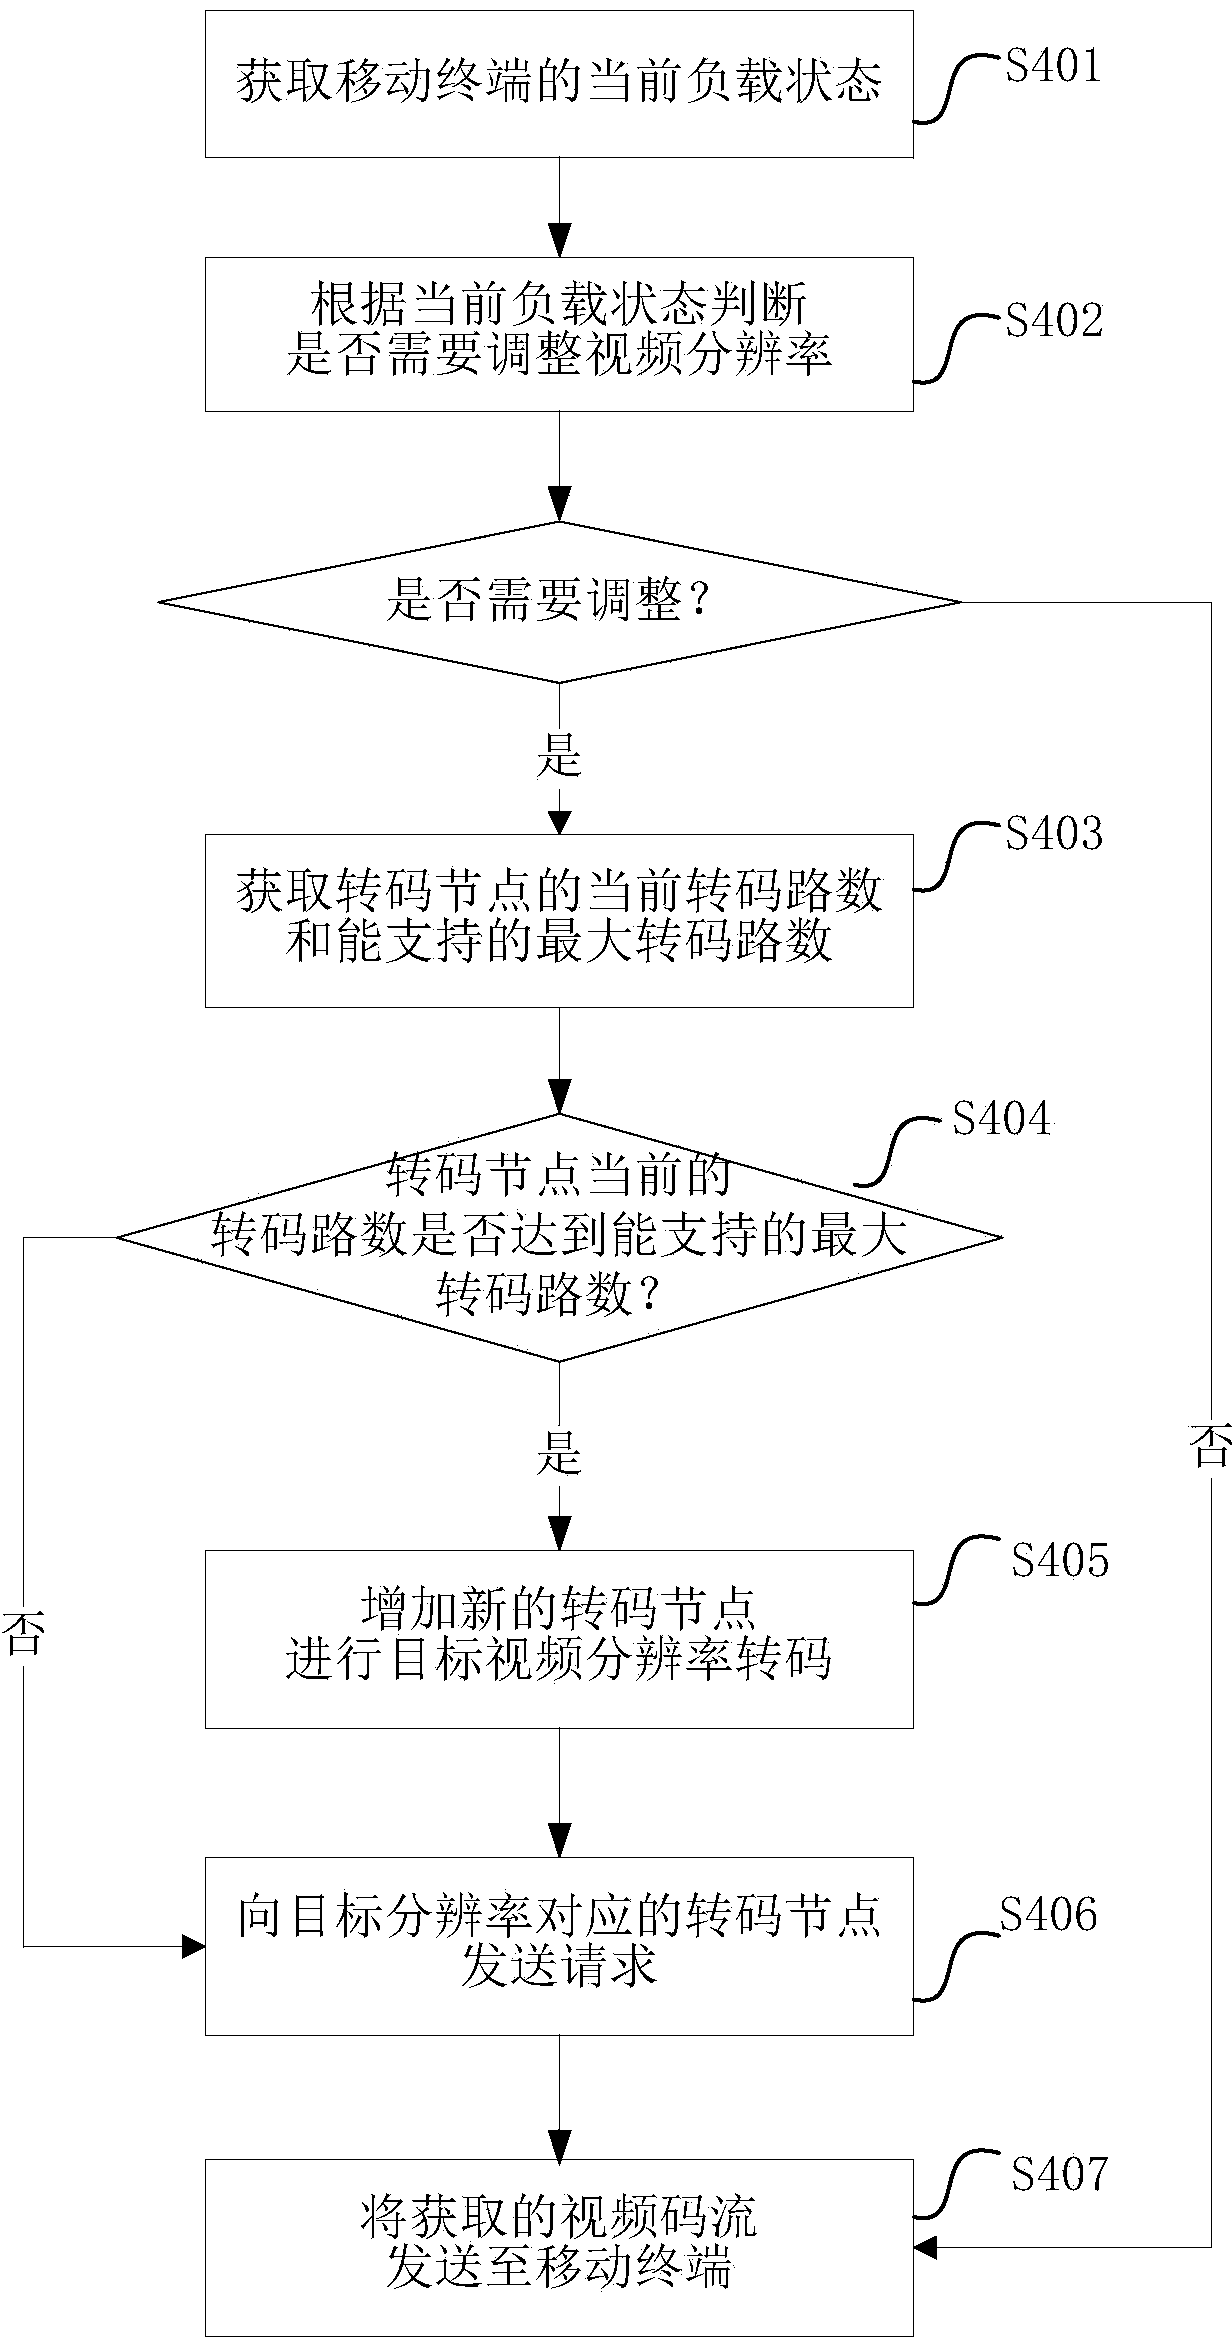 Method and system for transcoding video based on mobile terminal